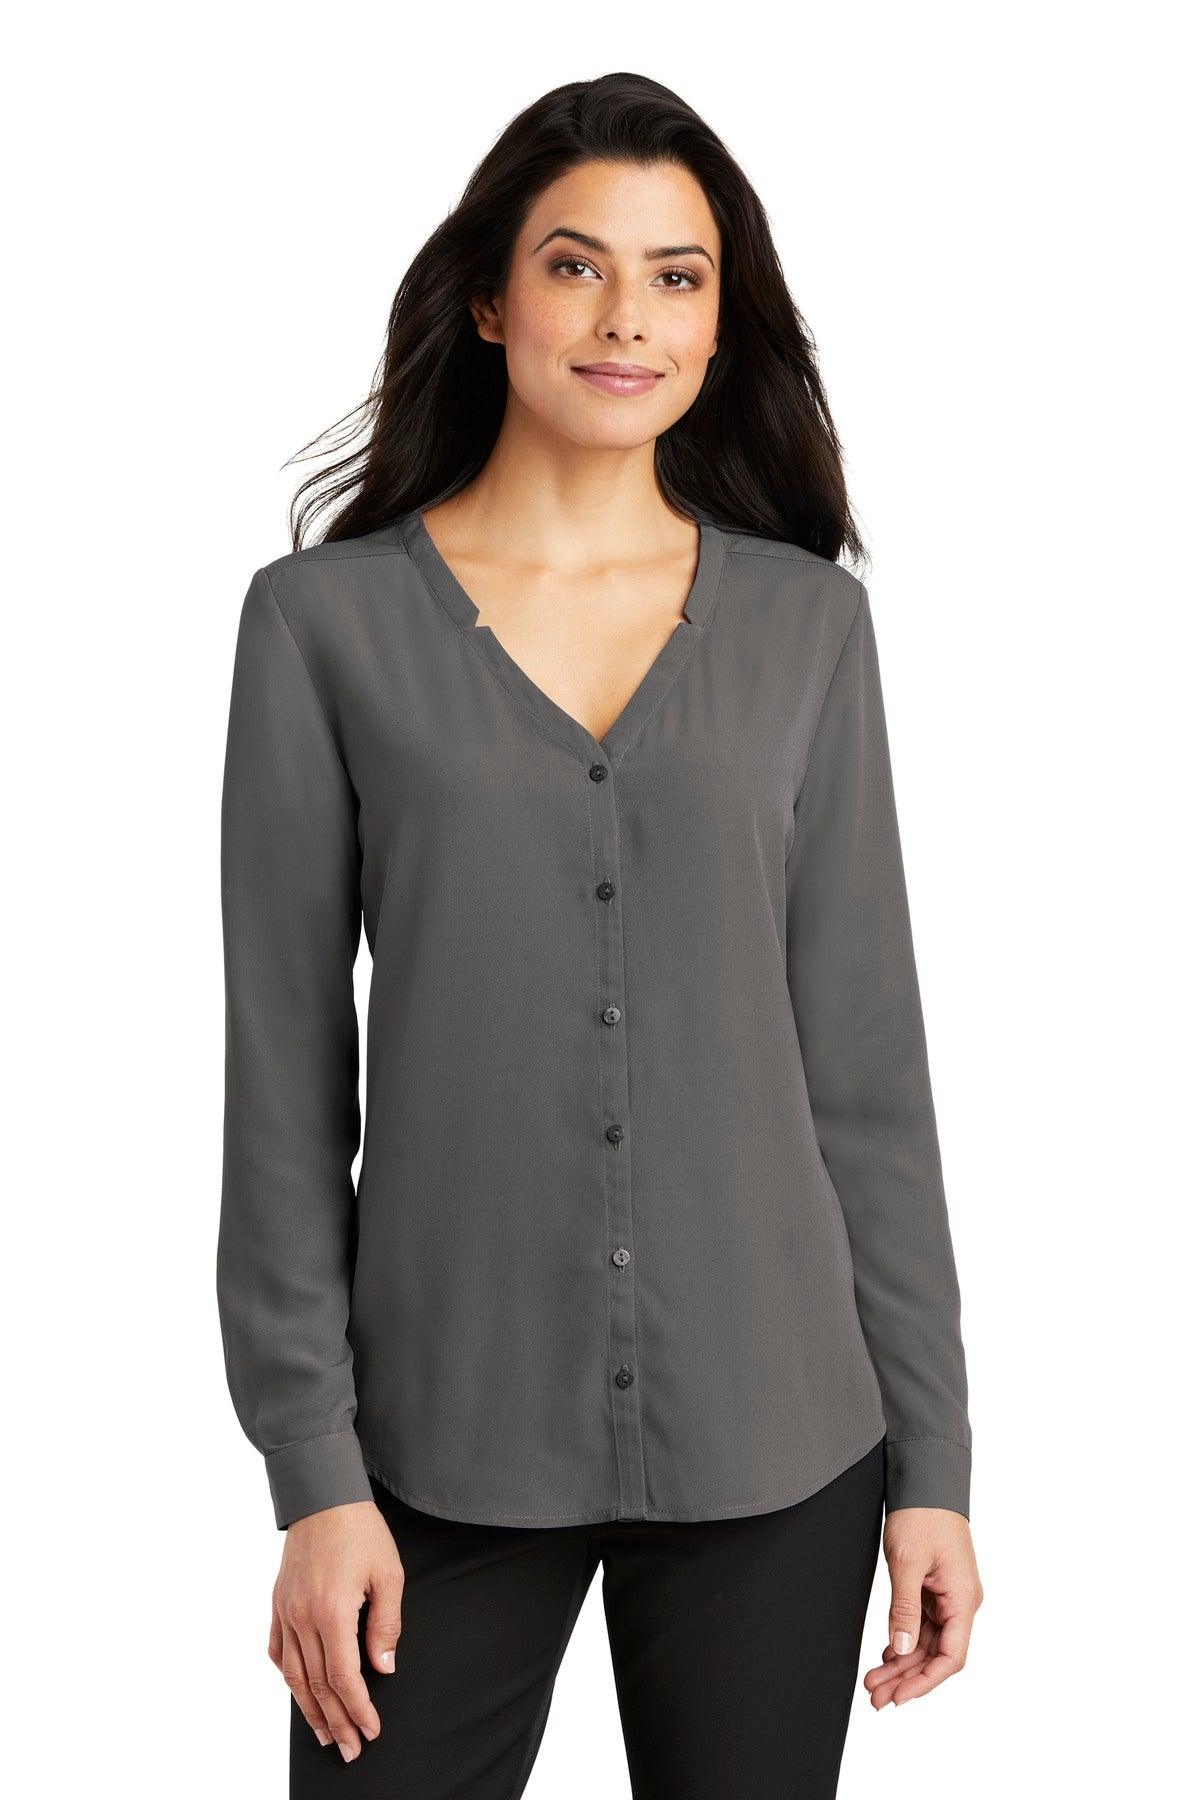 Port Authority Ladies Long Sleeve Button-Front Blouse. LW700 - Dresses Max